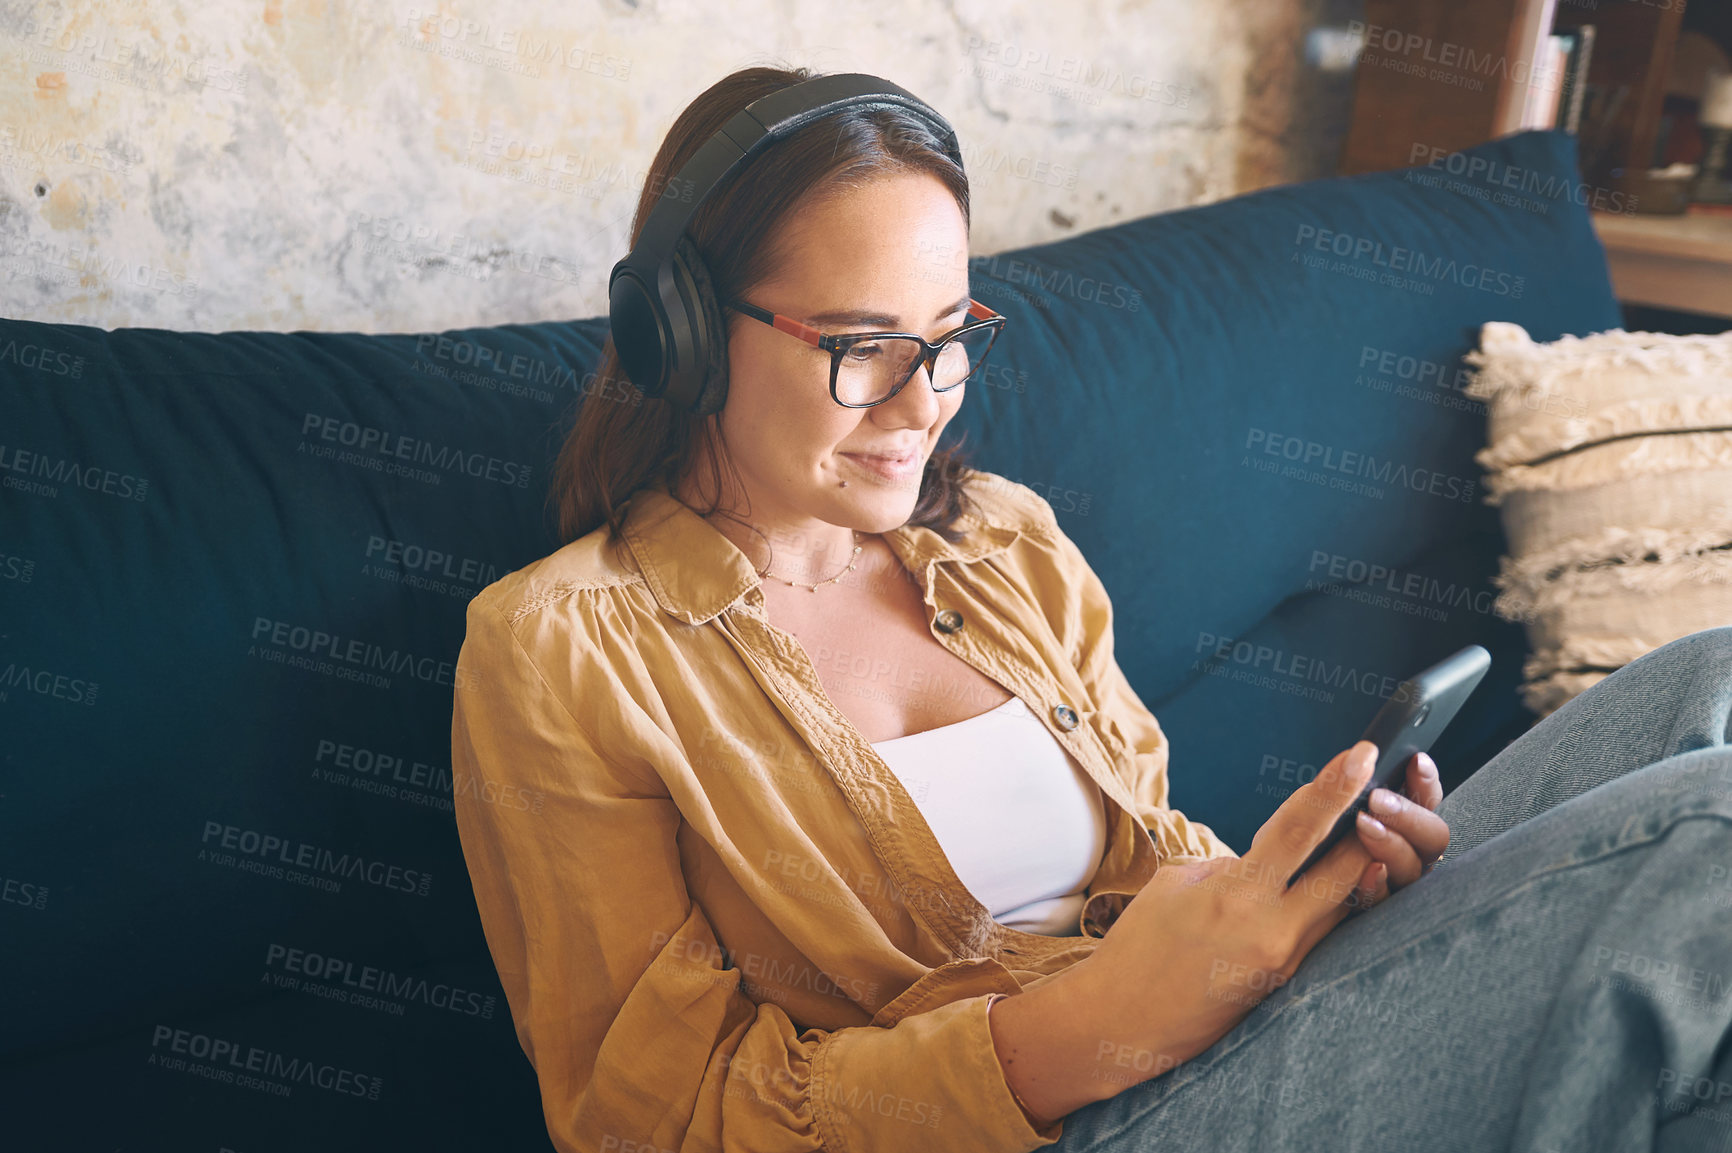 Buy stock photo Shot of a young woman using headphones and a smartphone while relaxing on the sofa at home